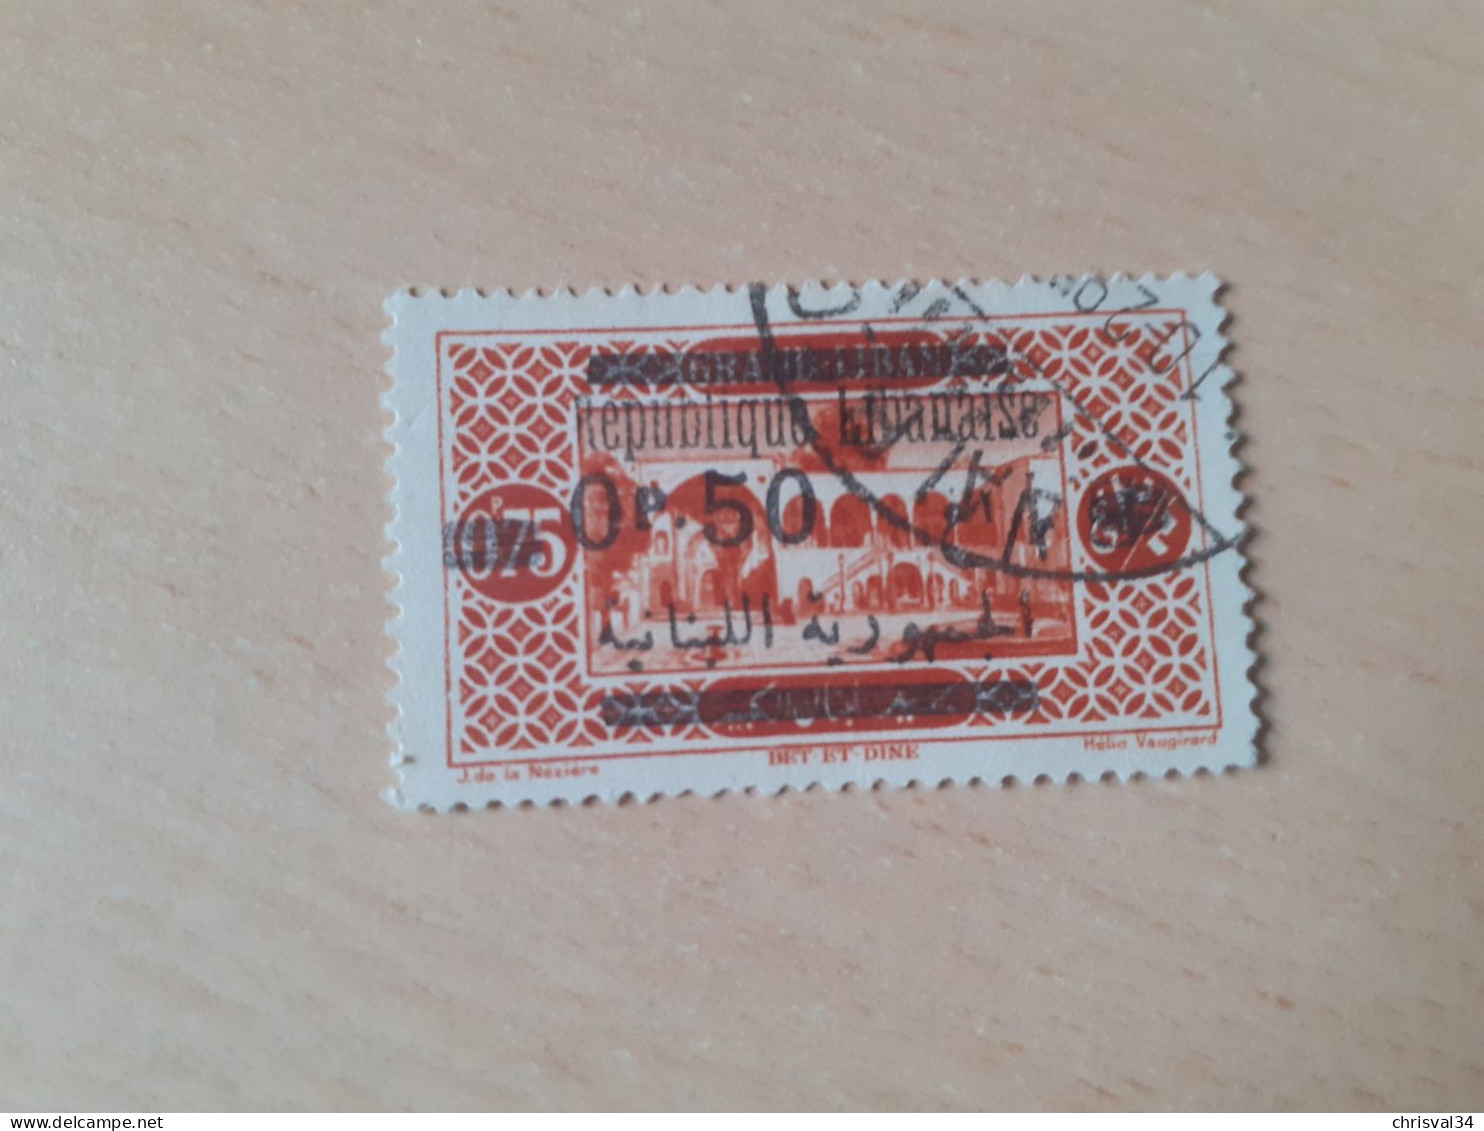 TIMBRE   GRAND  LIBAN       N  117       COTE  2,00  EUROS    OBLITERE - Used Stamps